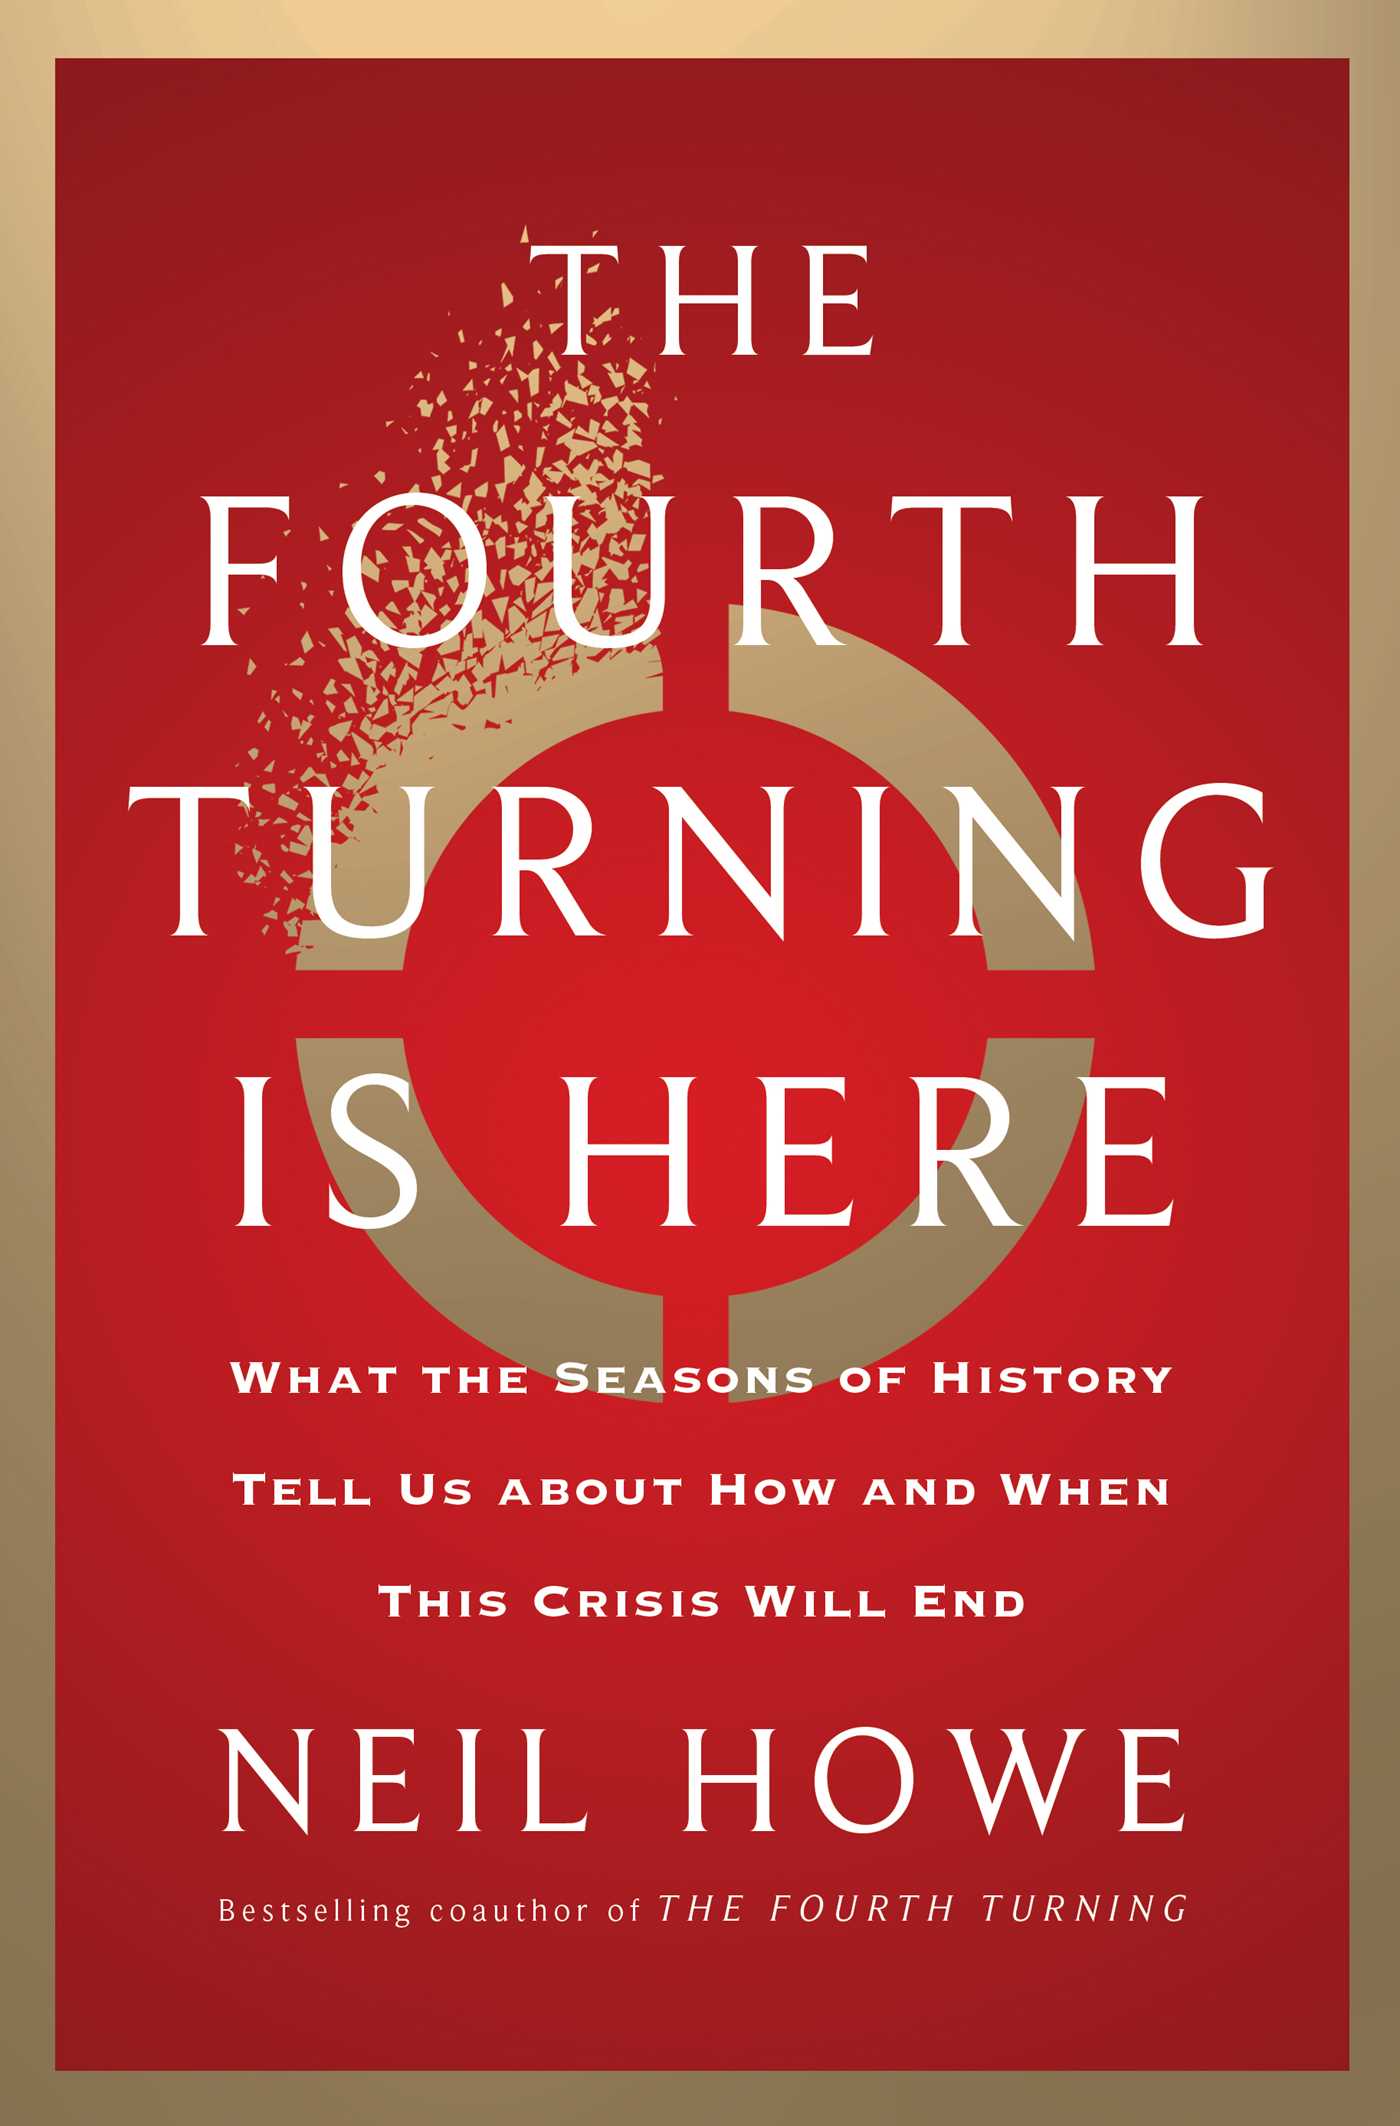 Image for "The Fourth Turning Is Here"